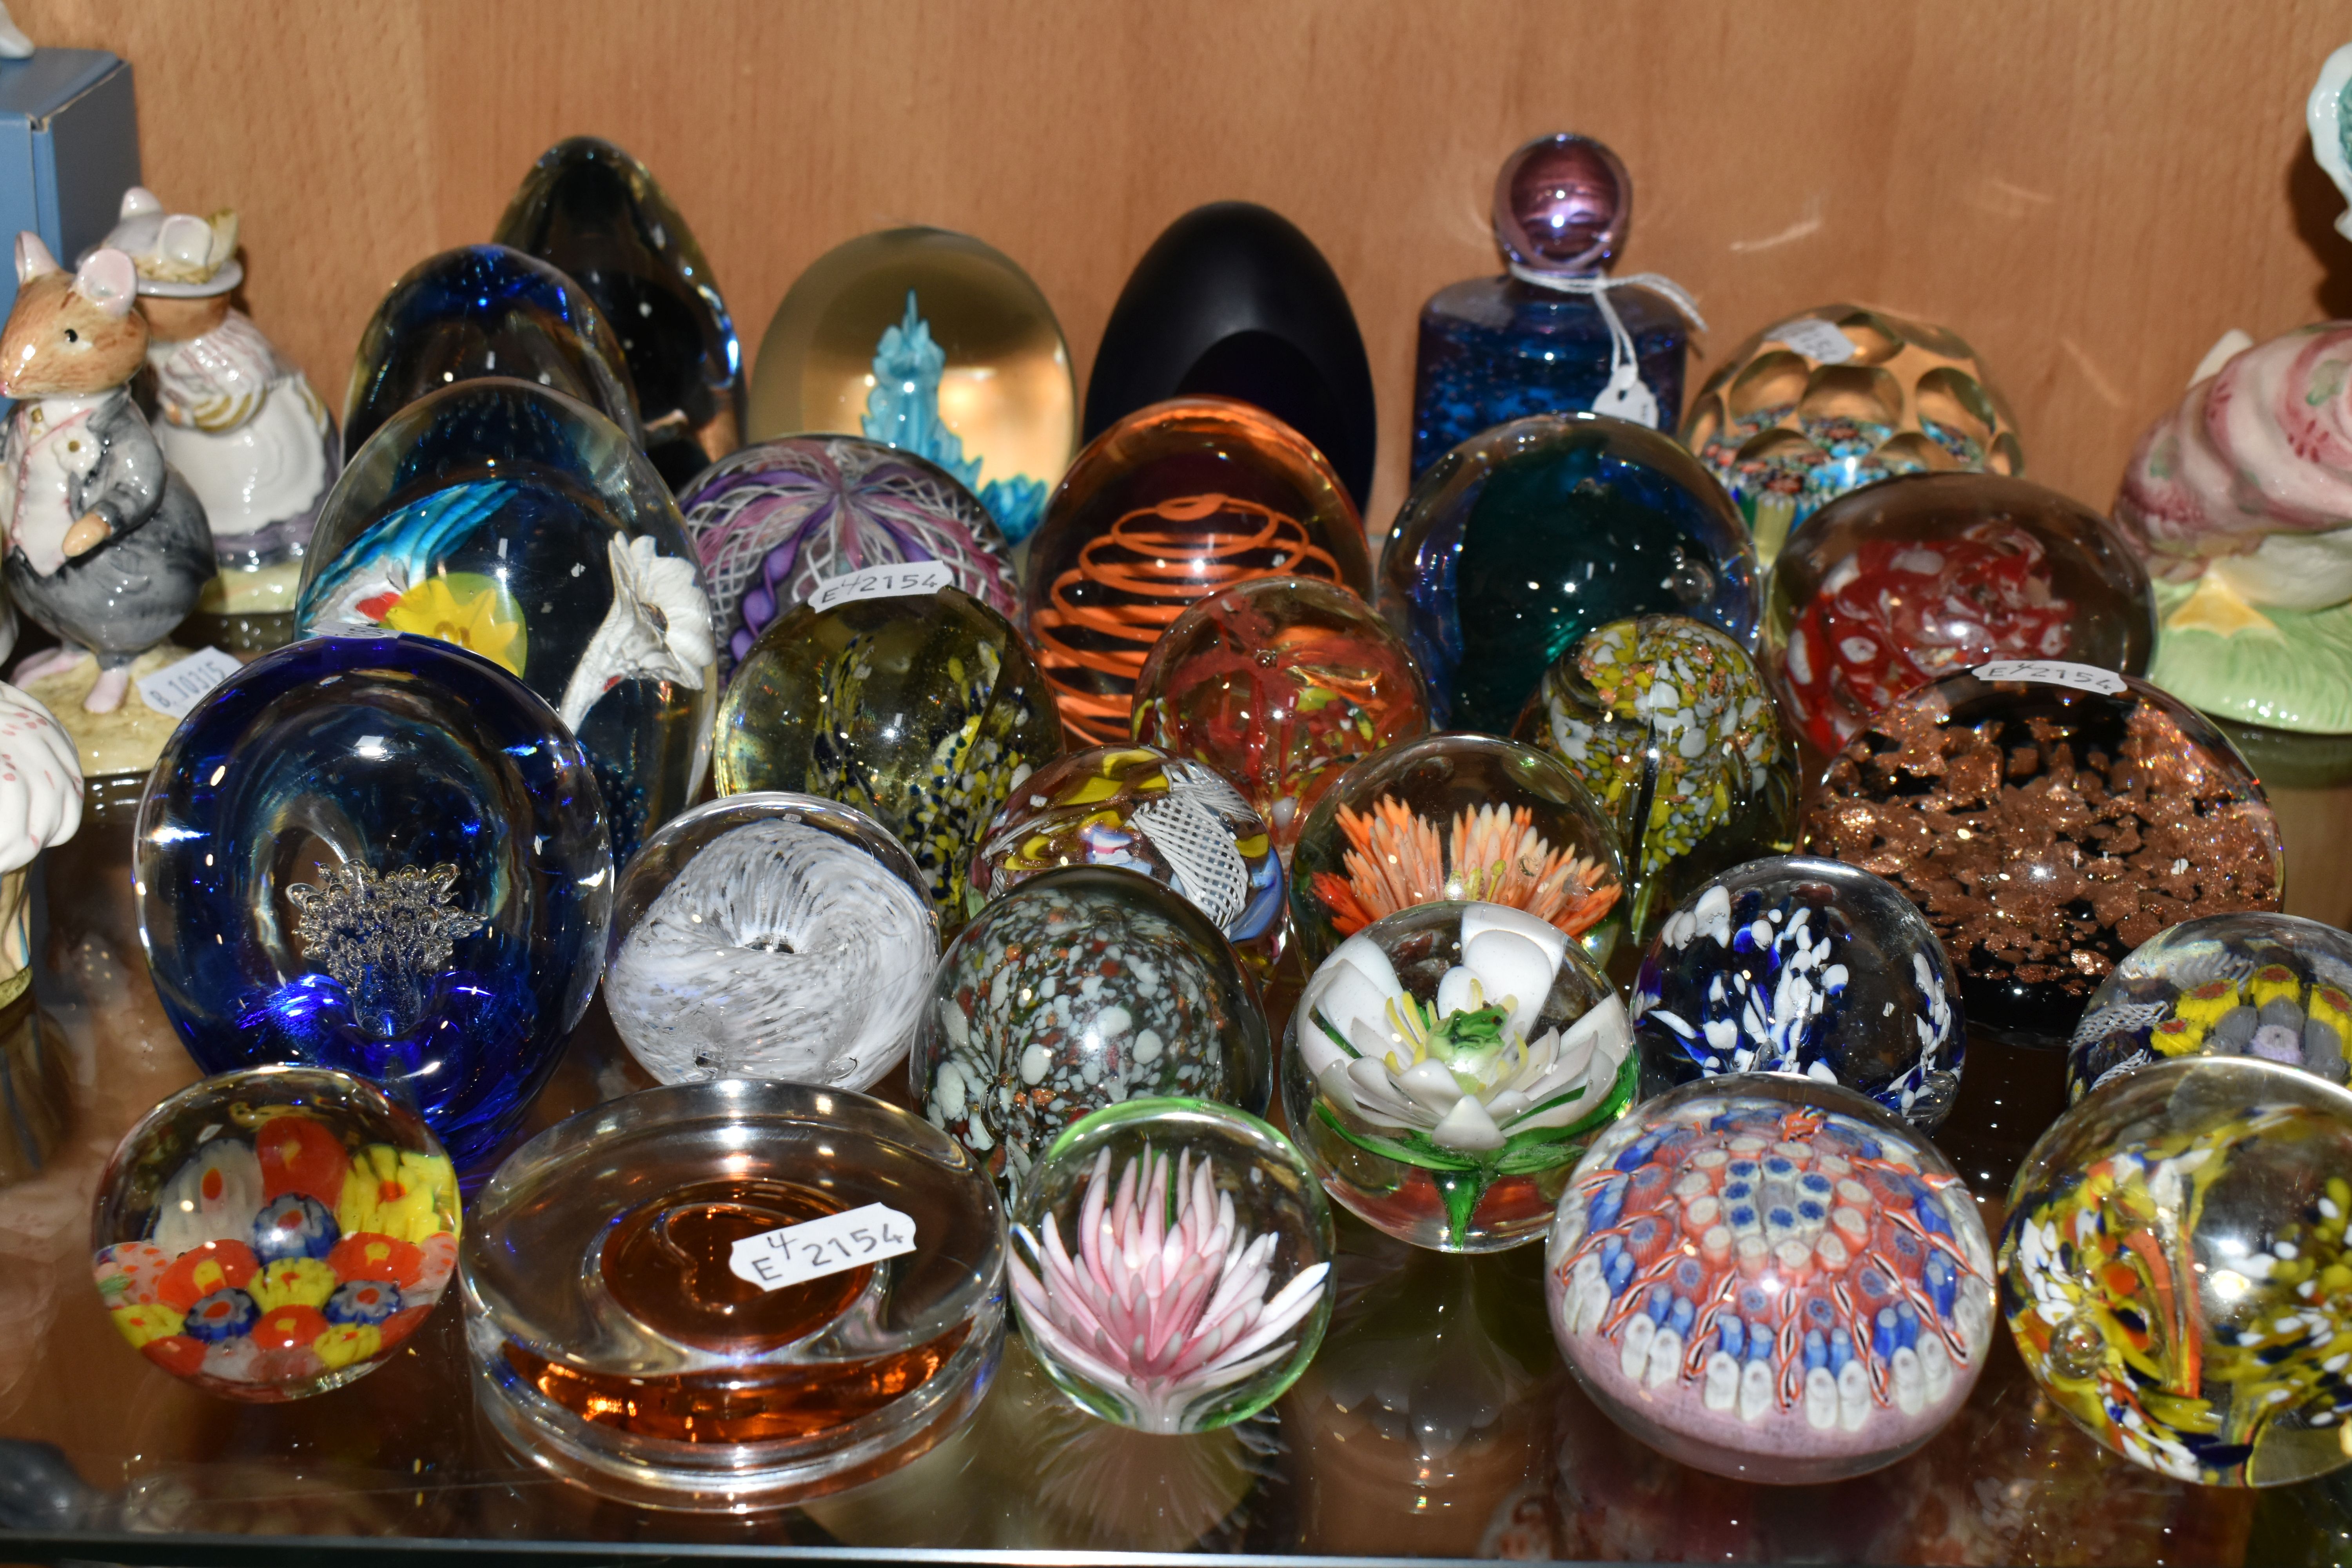 TWENTY EIGHT PAPERWEIGHTS, including millefiori, latticino, controlled bubbles, faceted, metallic